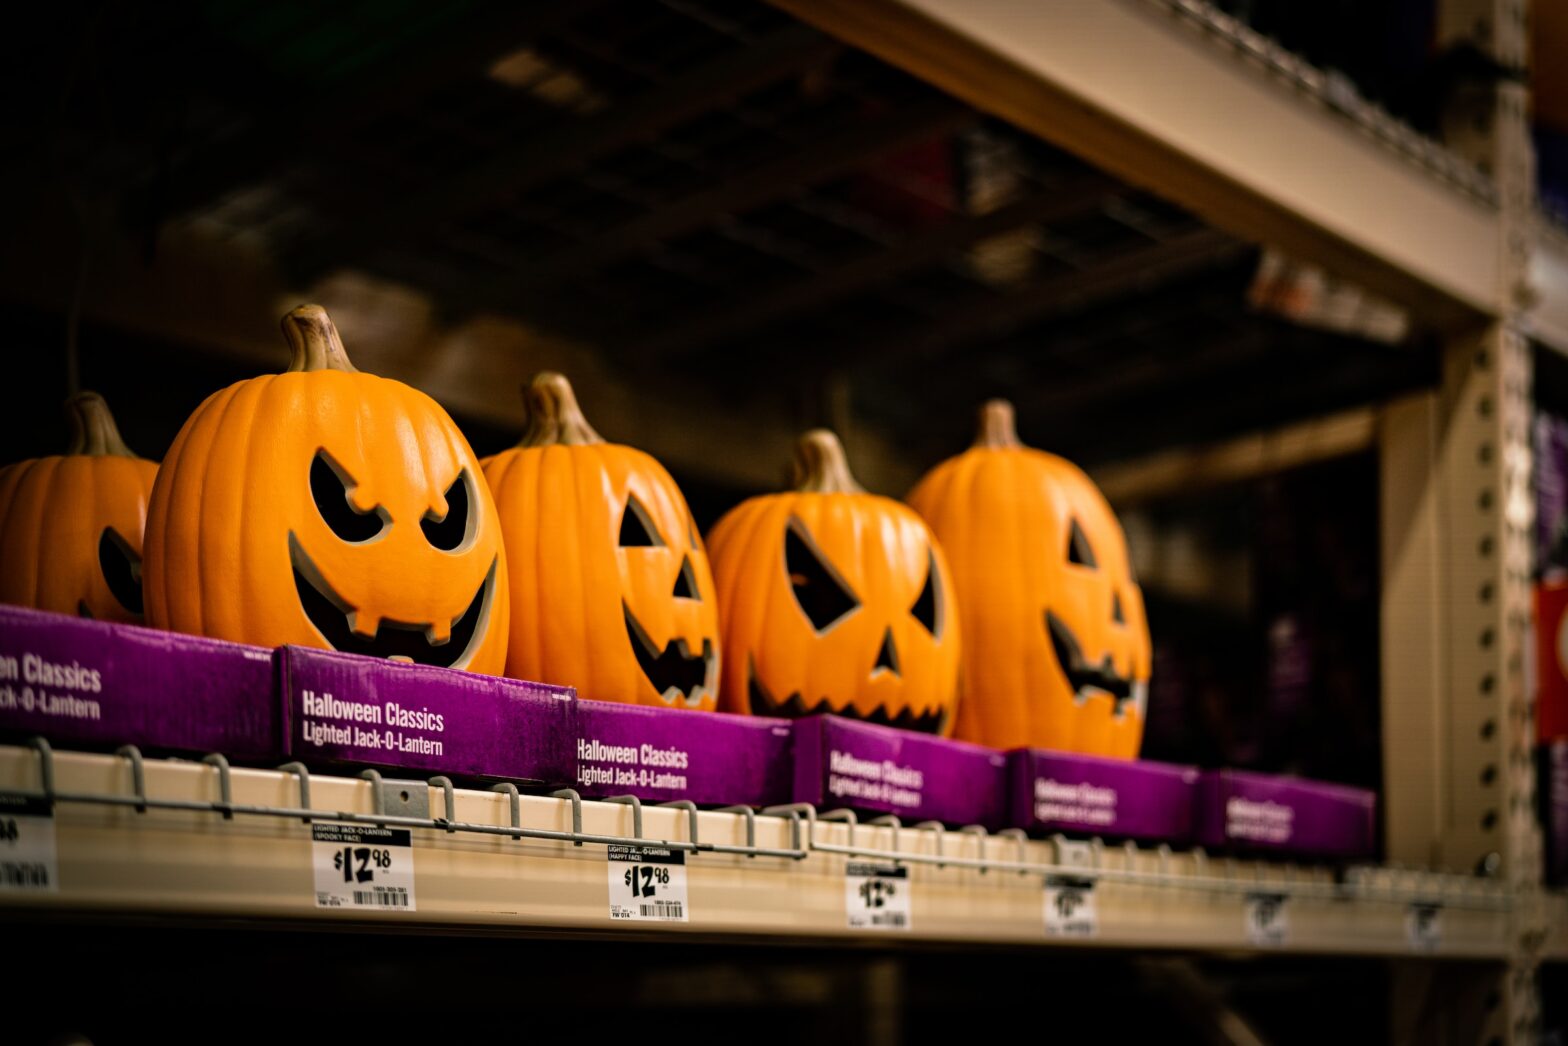 A row of pumpkins on display in an aisle